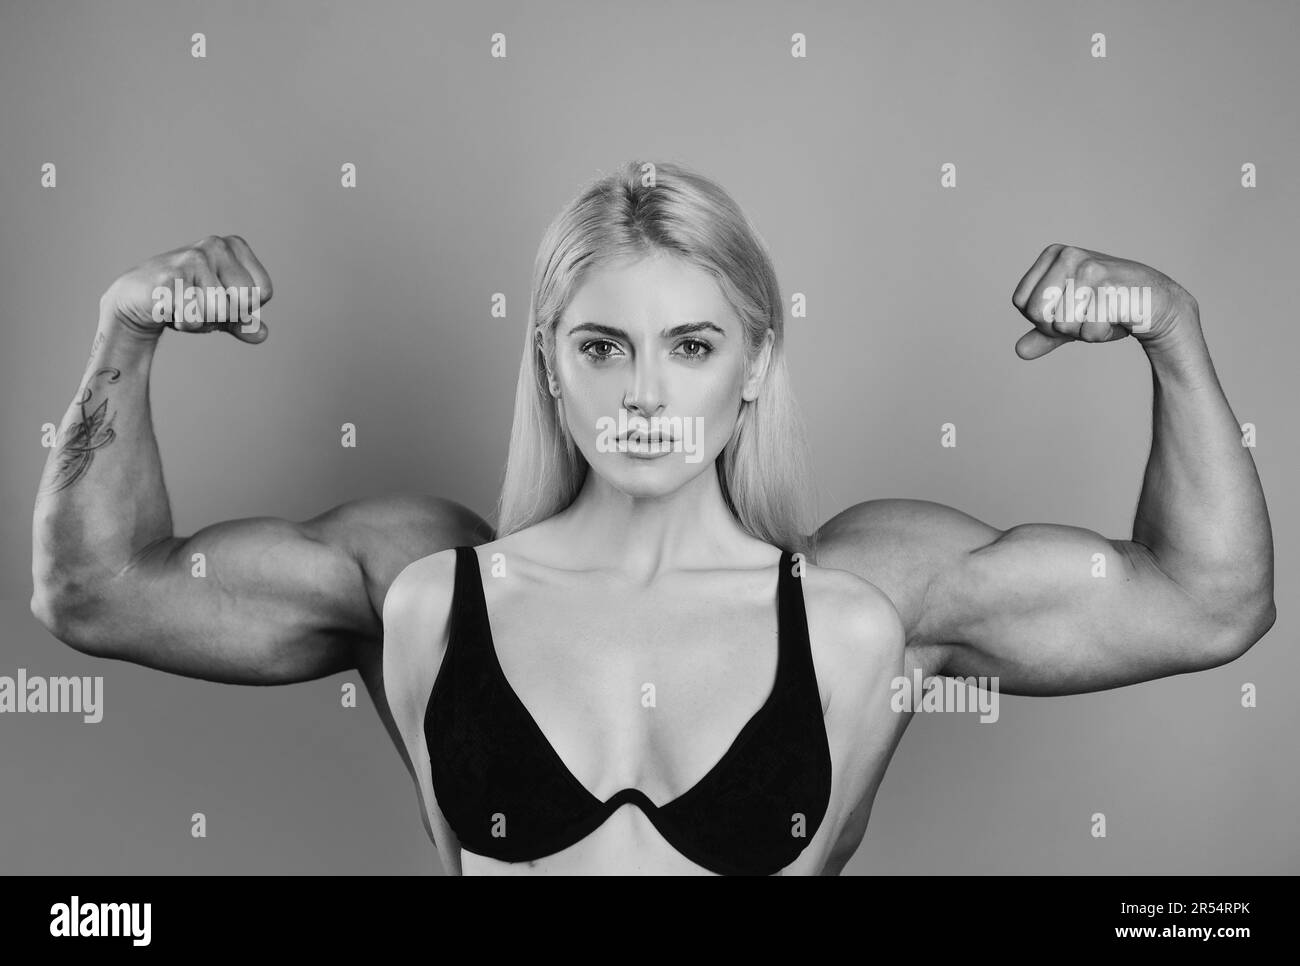 Girl shows her muscles strength Black and White Stock Photos & Images -  Alamy